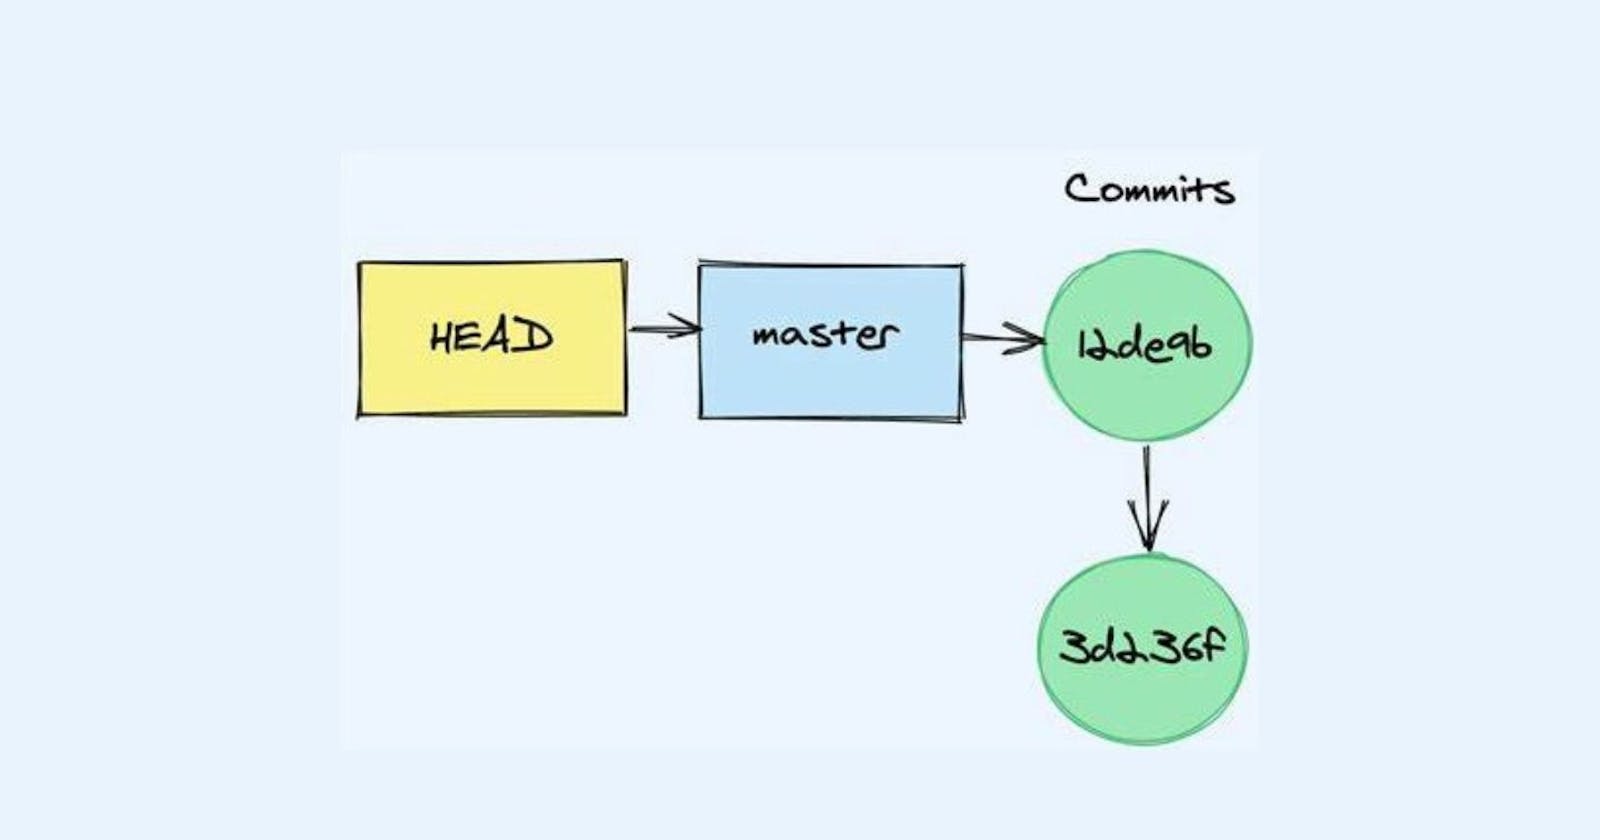 10. Git References (Master and Head)